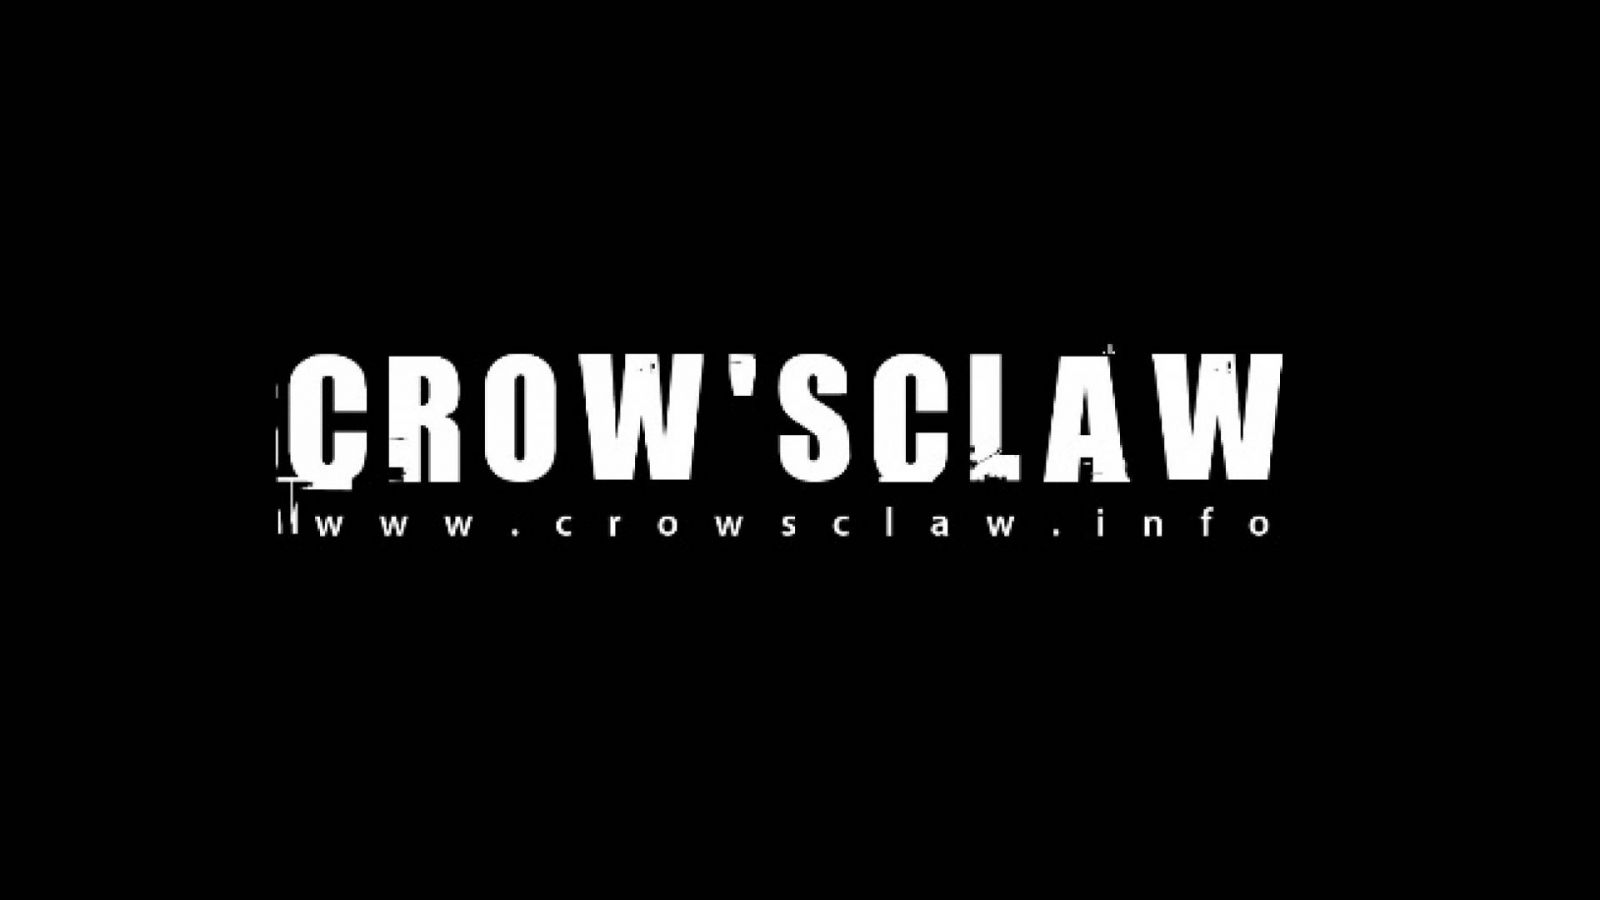 CROW'SCLAW © CROW'SCLAW